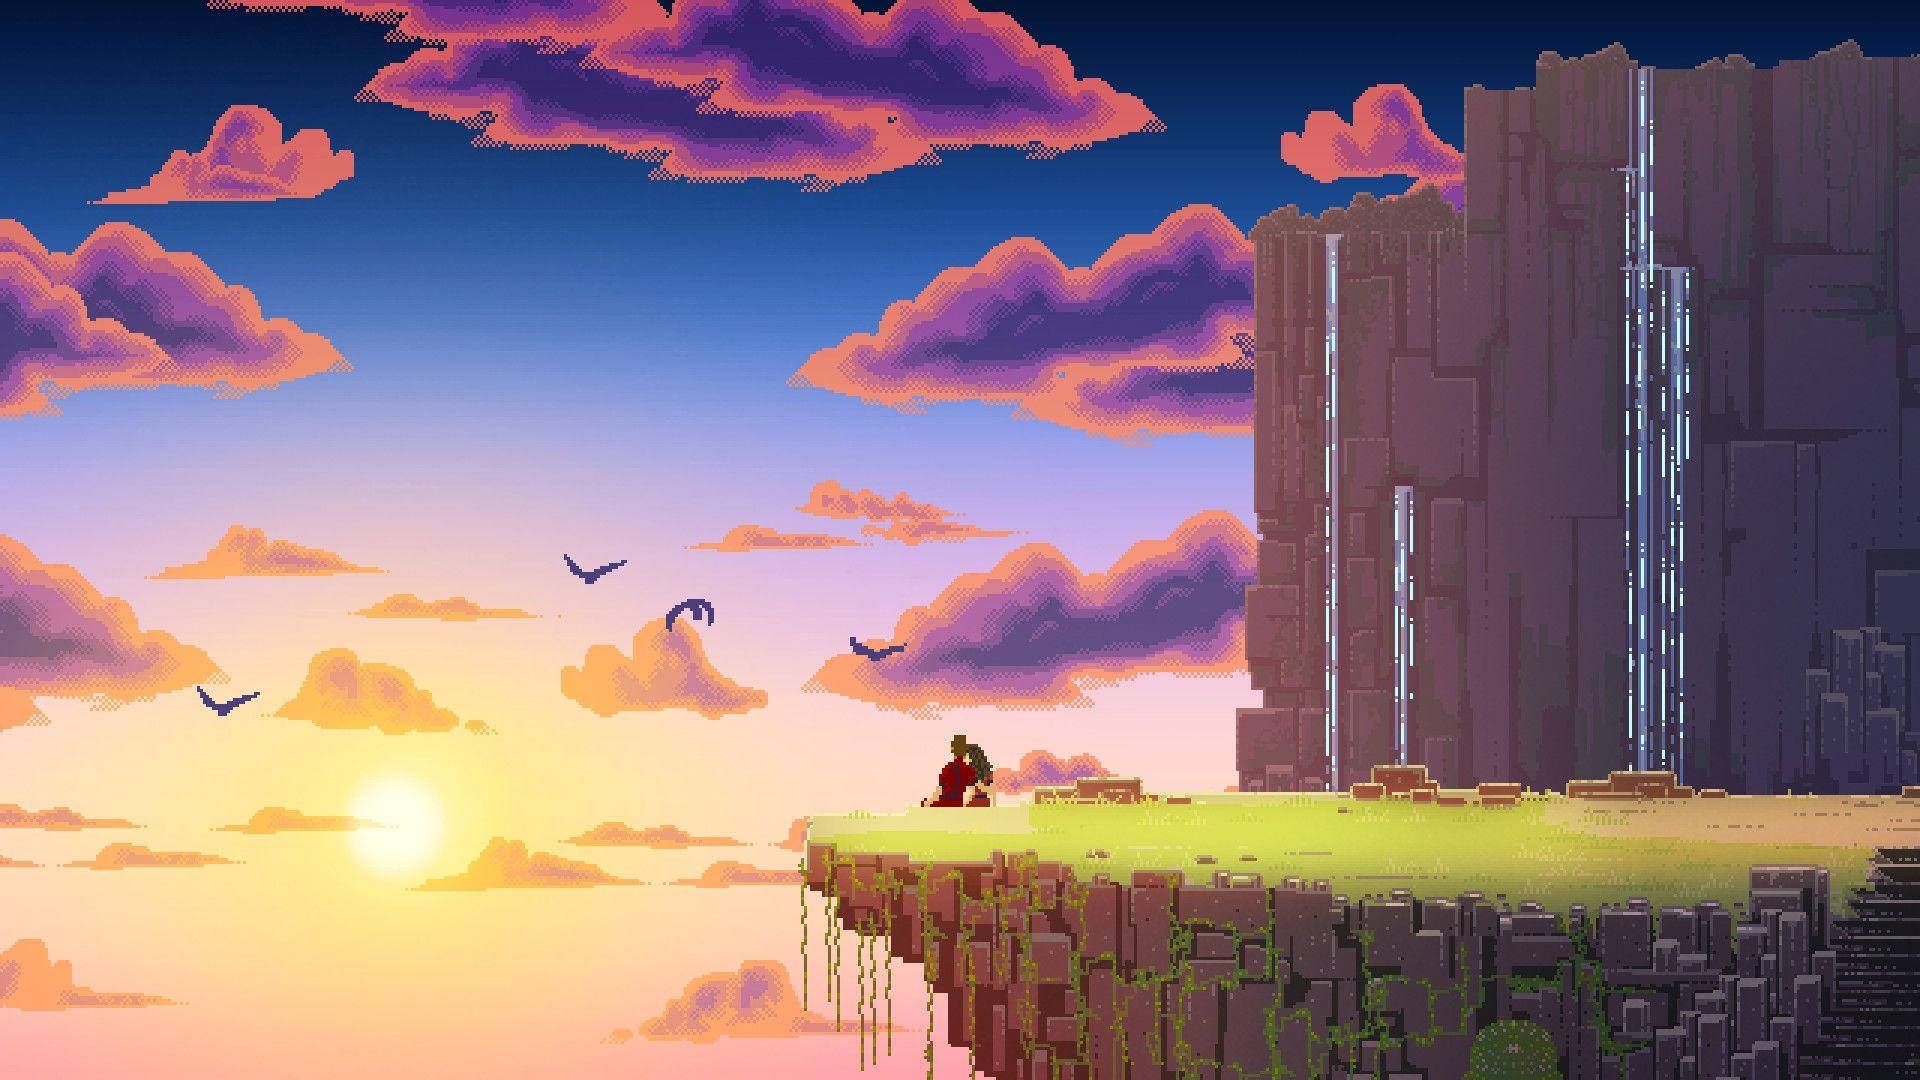 The sun sets behind a player character in a green tunic and red pants, standing on a ledge overlooking a tall, gray castle. - Pixel art